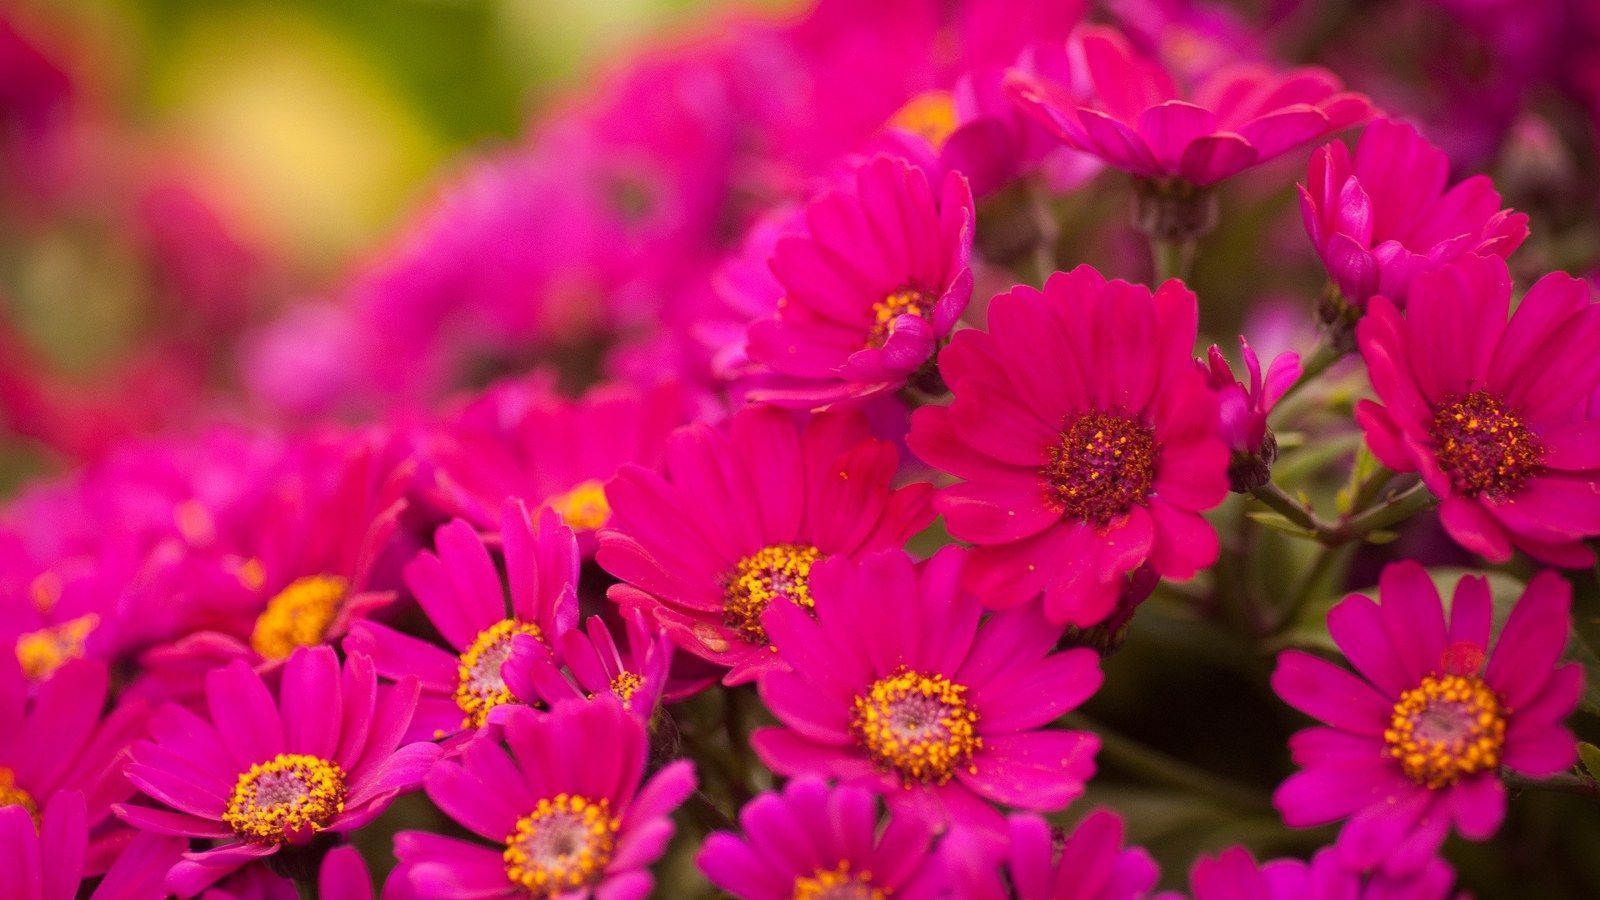 Flower Pink Hd Wallpapers For Laptop | Best HD Wallpapers